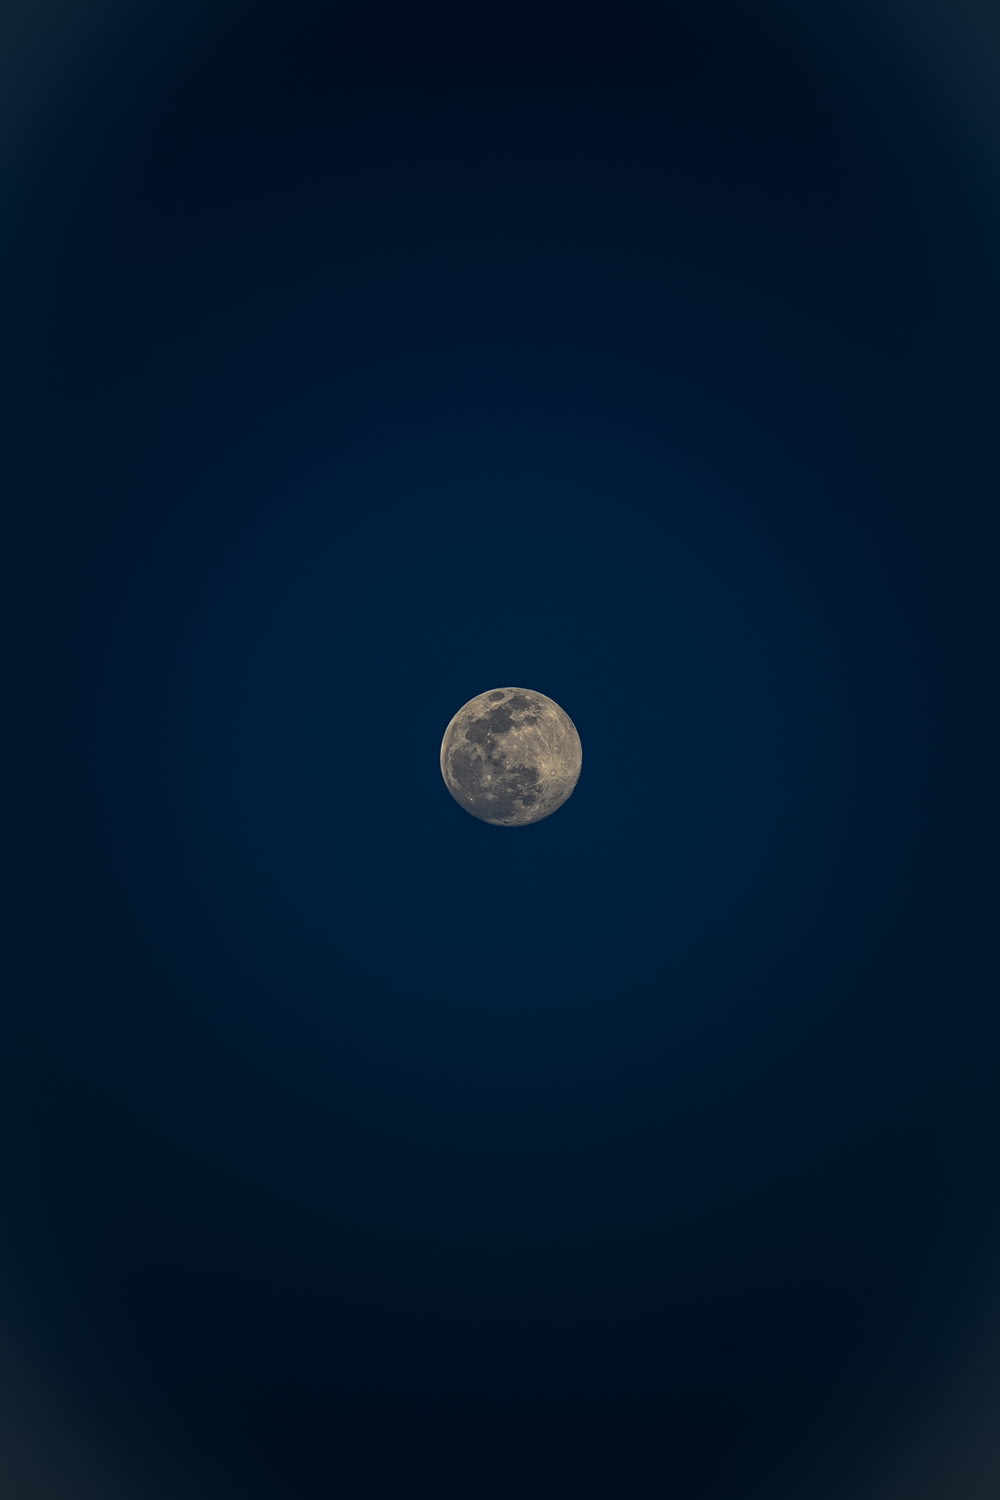 a full moon is seen in the night sky